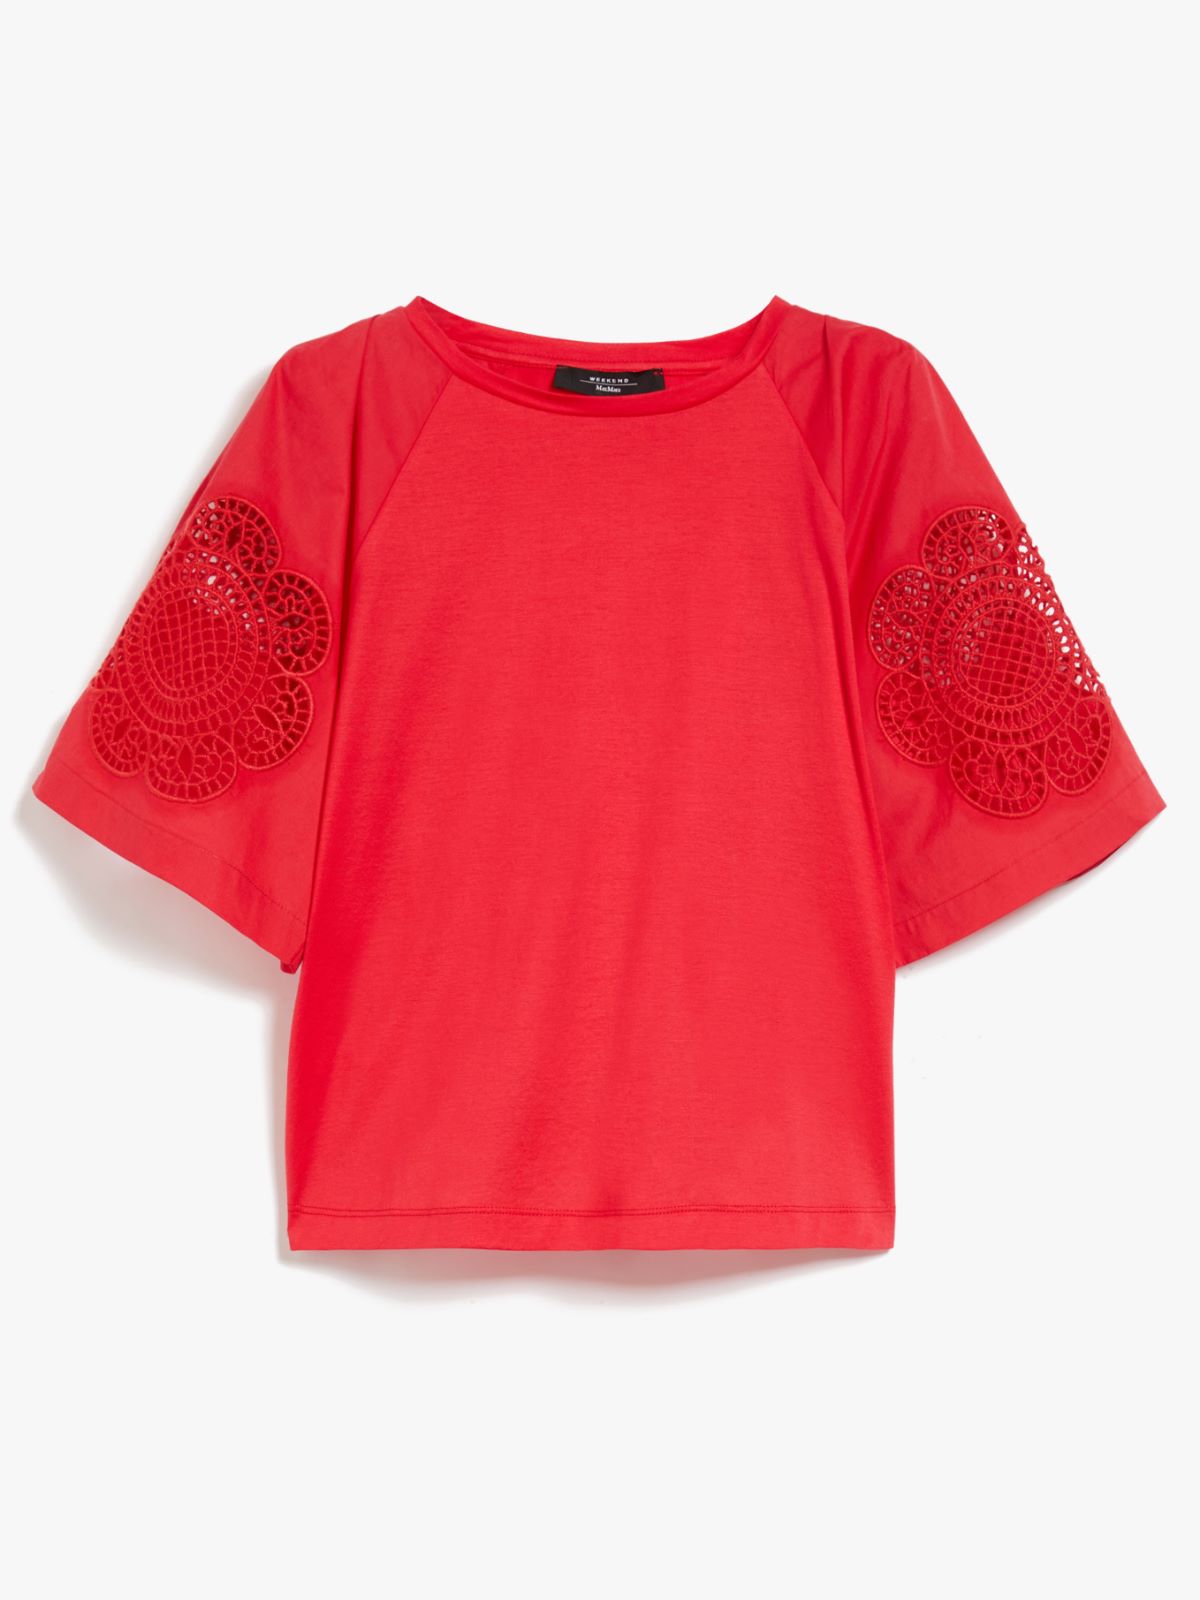 T-shirt in jersey di cotone - ROSSO - Weekend Max Mara - 6